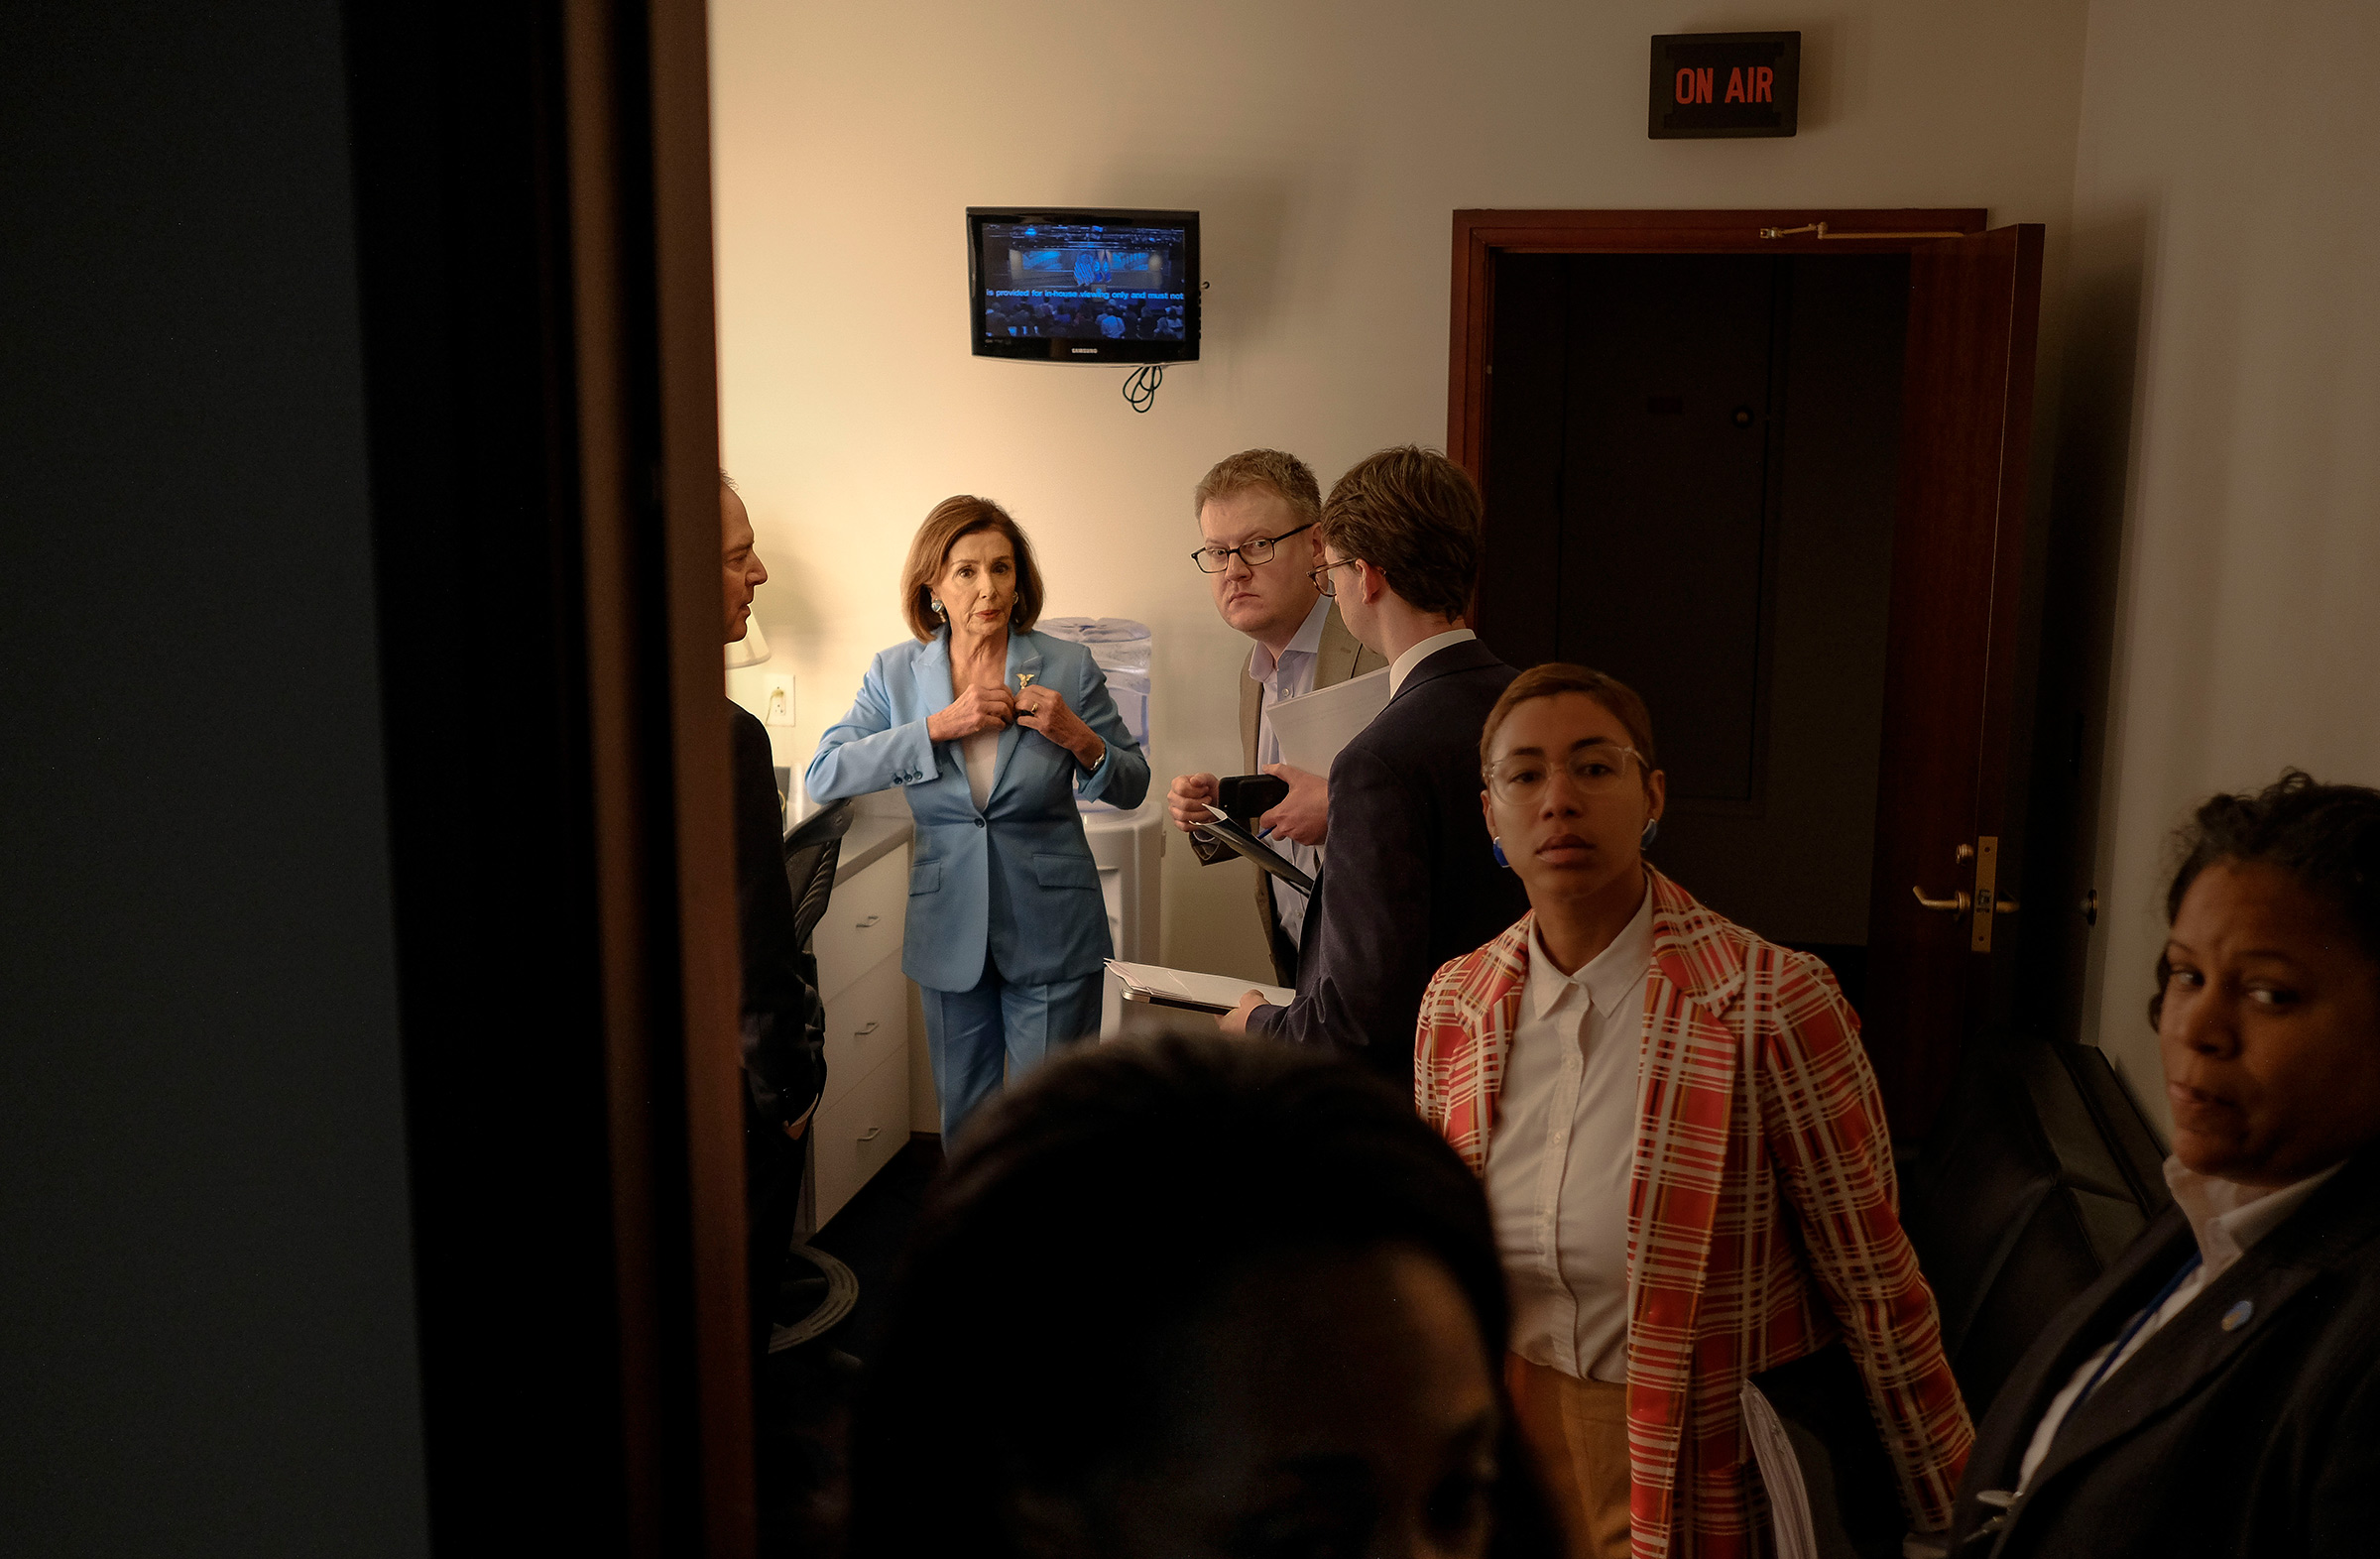 House Speaker Nancy Pelosi (D-Calif.) and House Intelligence Committee Chairman Adam Schiff (D-Calif.) enter the studio where they will speak to reporters on next steps involving the impeachment inquiry at a press conference in the Capitol in Washington, D.C. on Oct. 2. (Gabriella Demczuk for TIME)